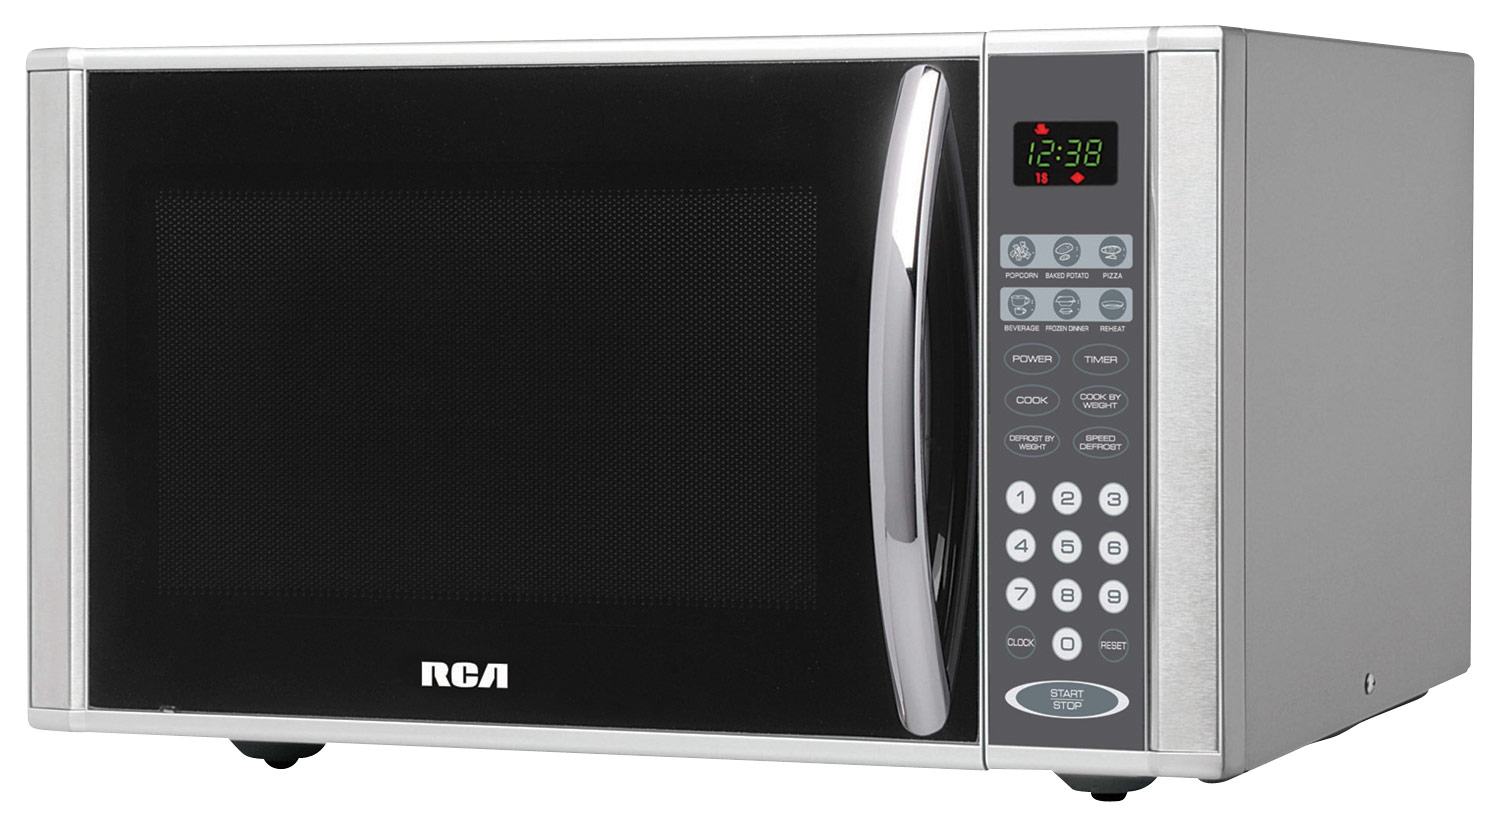 RCA - 1.1 Cu. Ft. Mid-Size Microwave - Stainless steel